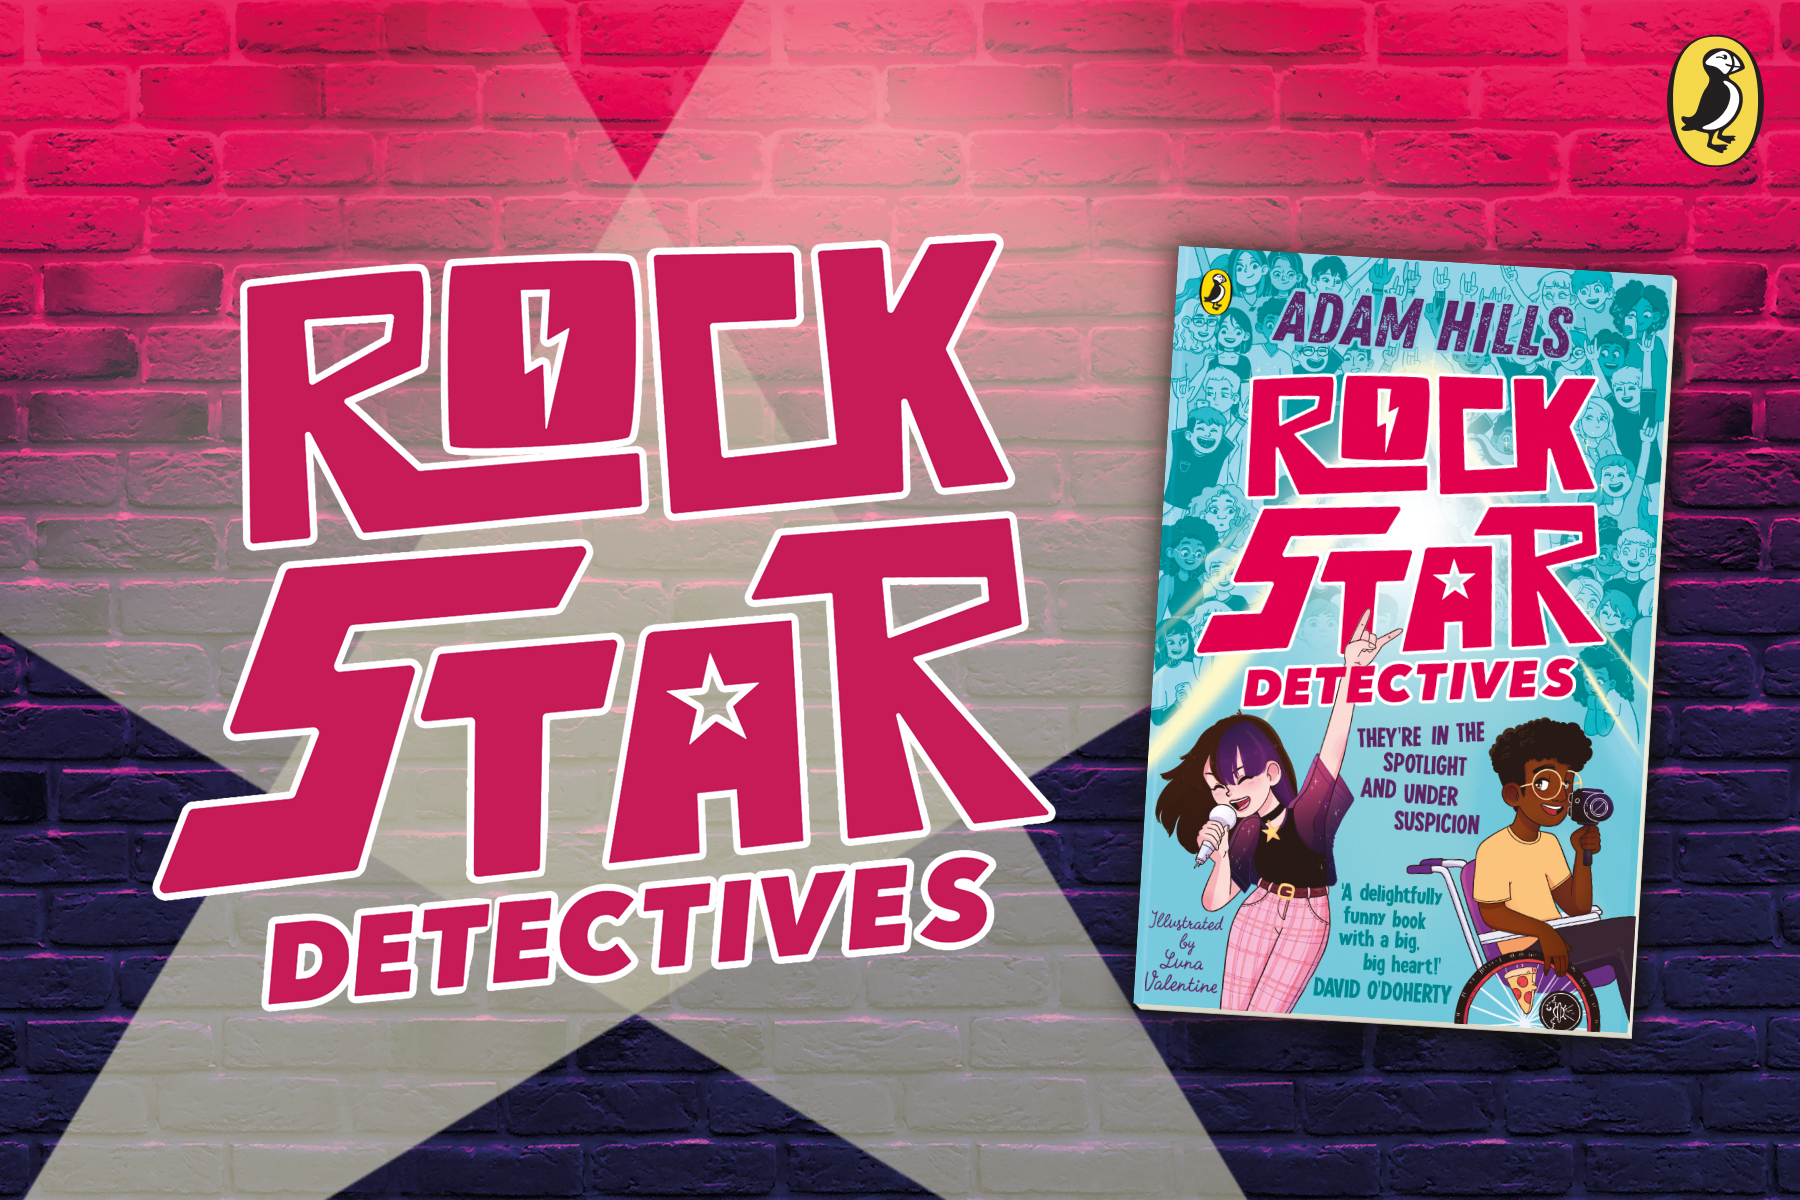 A photo of the book Rockstar Detectives on a colourful brick background next to the title Rockstar Detectives